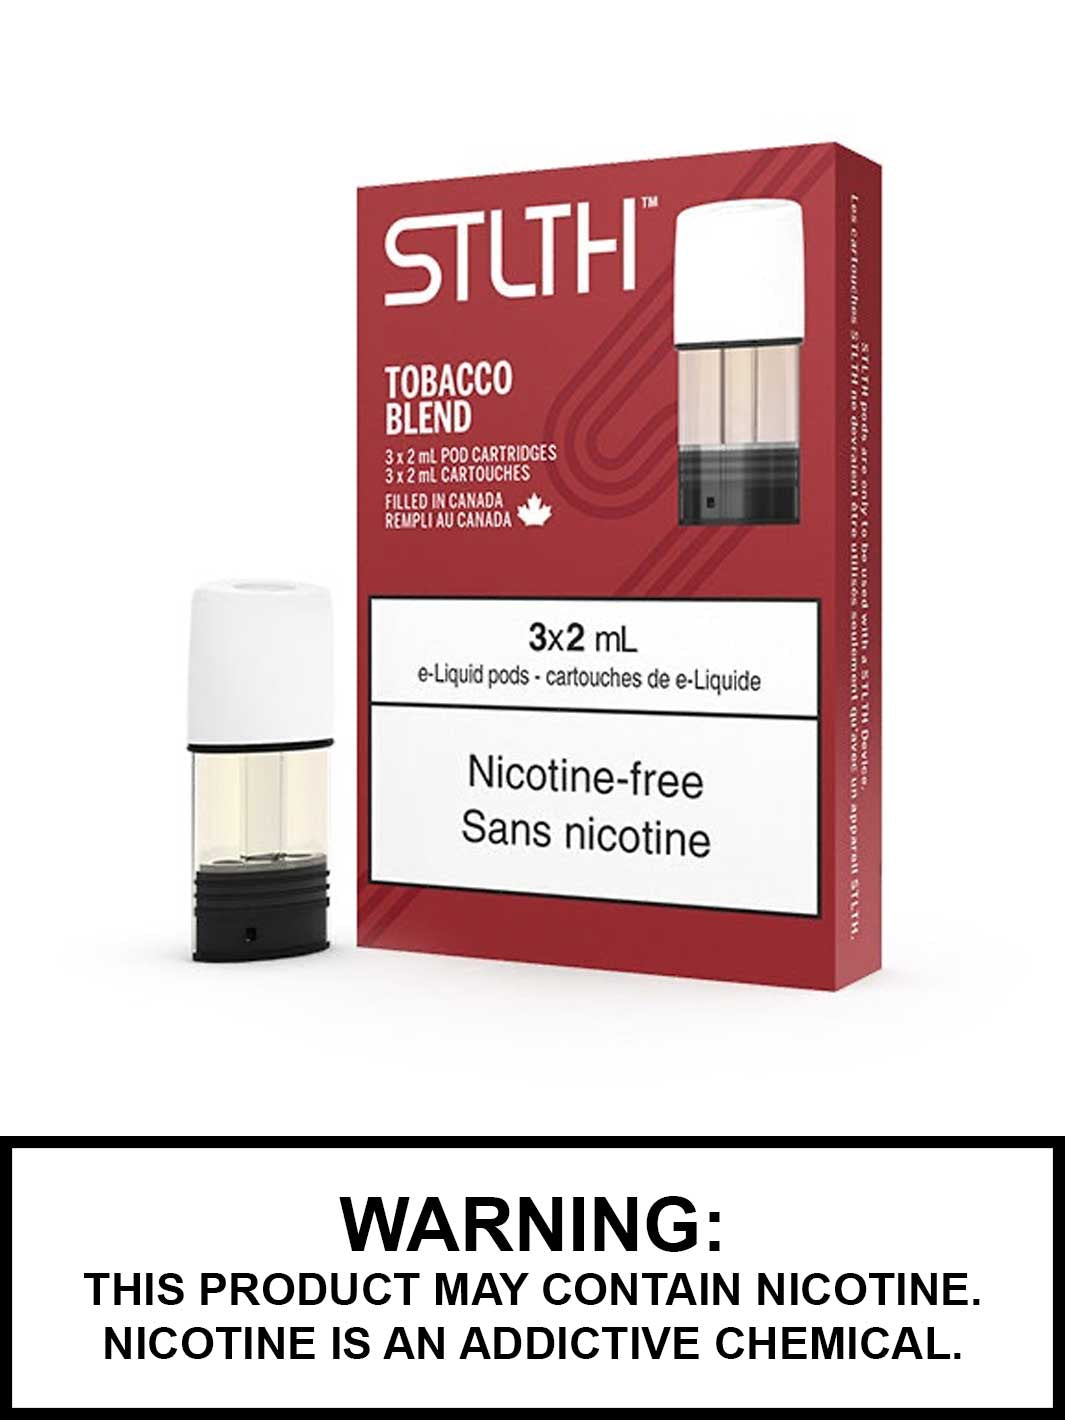 Tobacco Blend STLTH Pods Canada, Nicotine Free Tobacco eJuice, Vape360